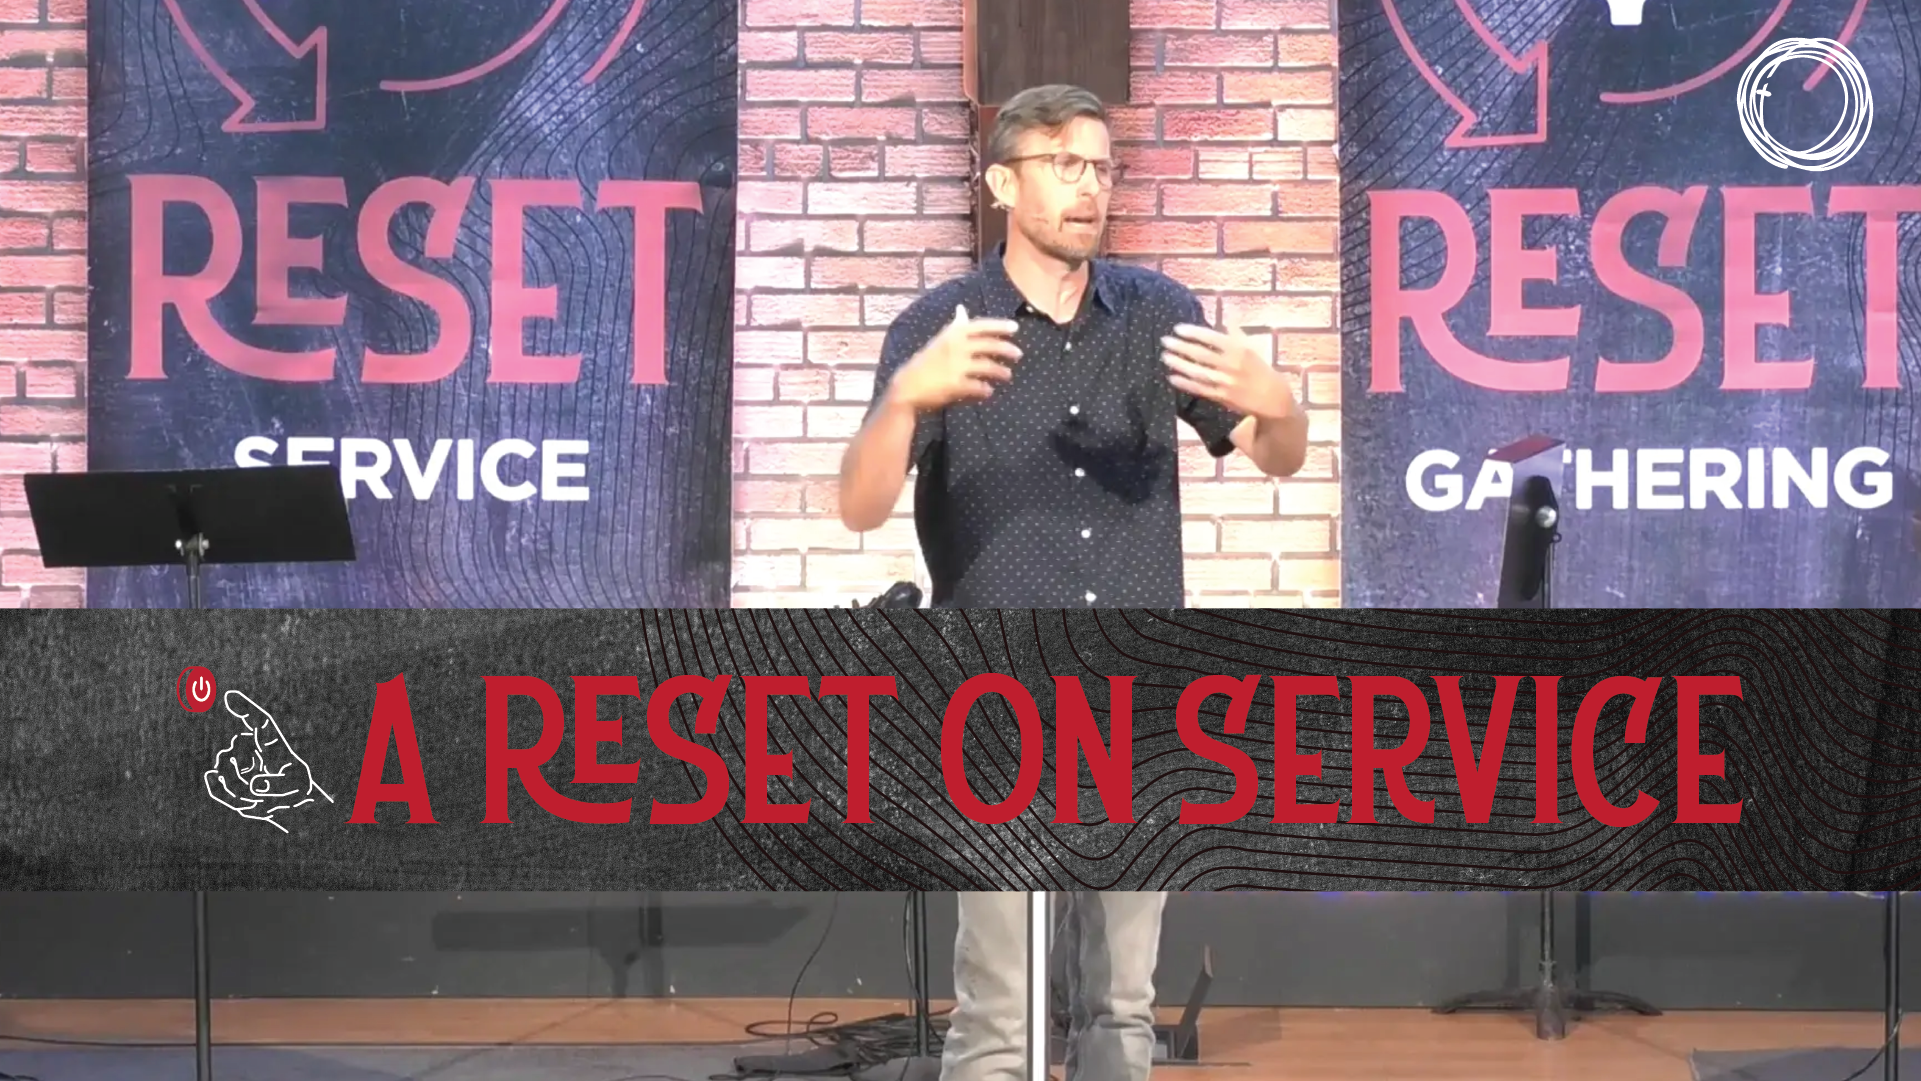 A Reset on Service